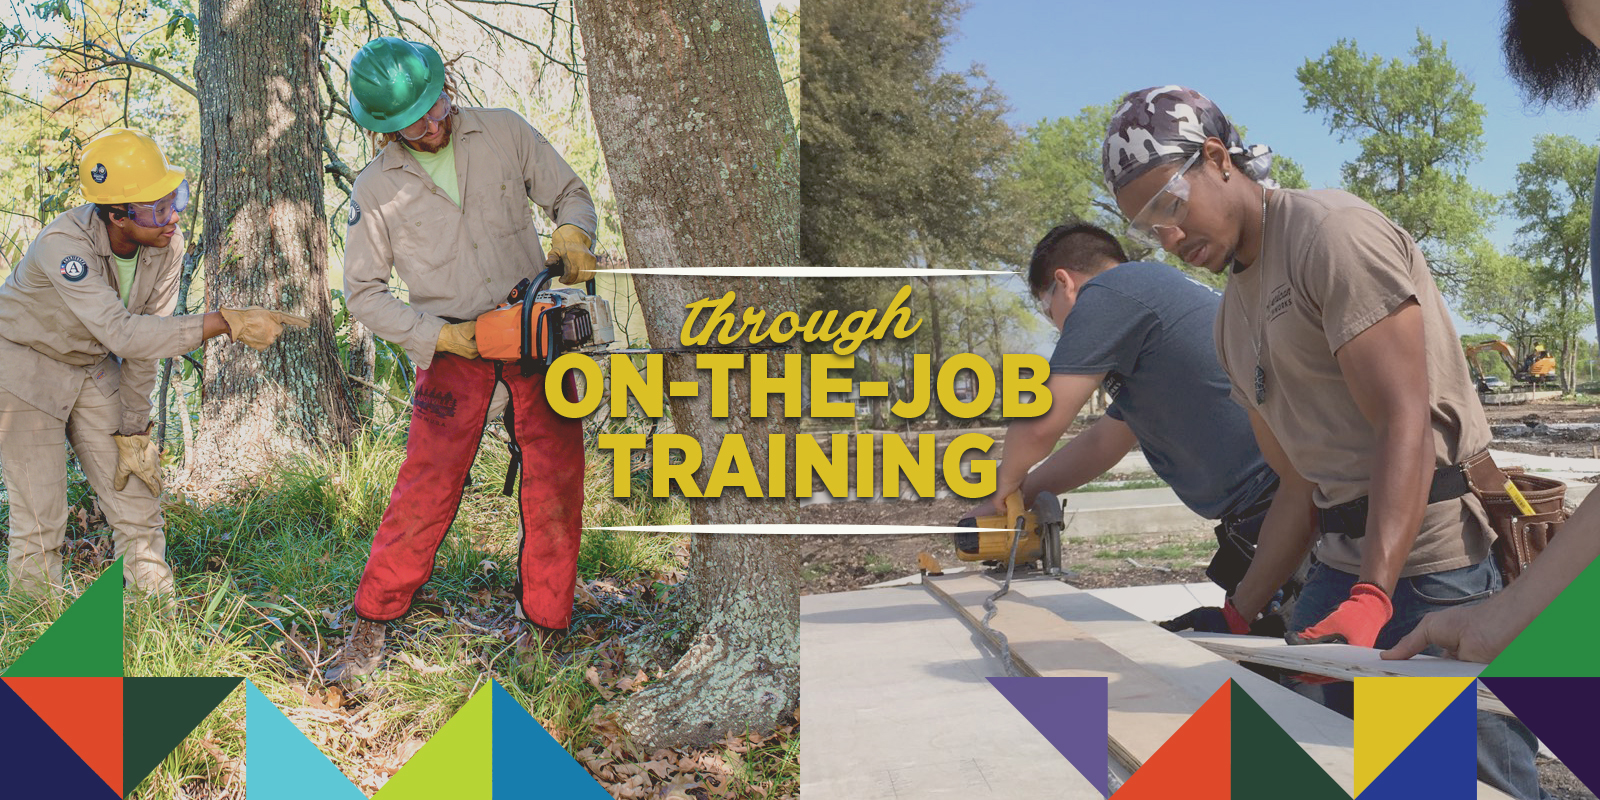 Opportunities to grow & serve through education, on the job training, and service to others.